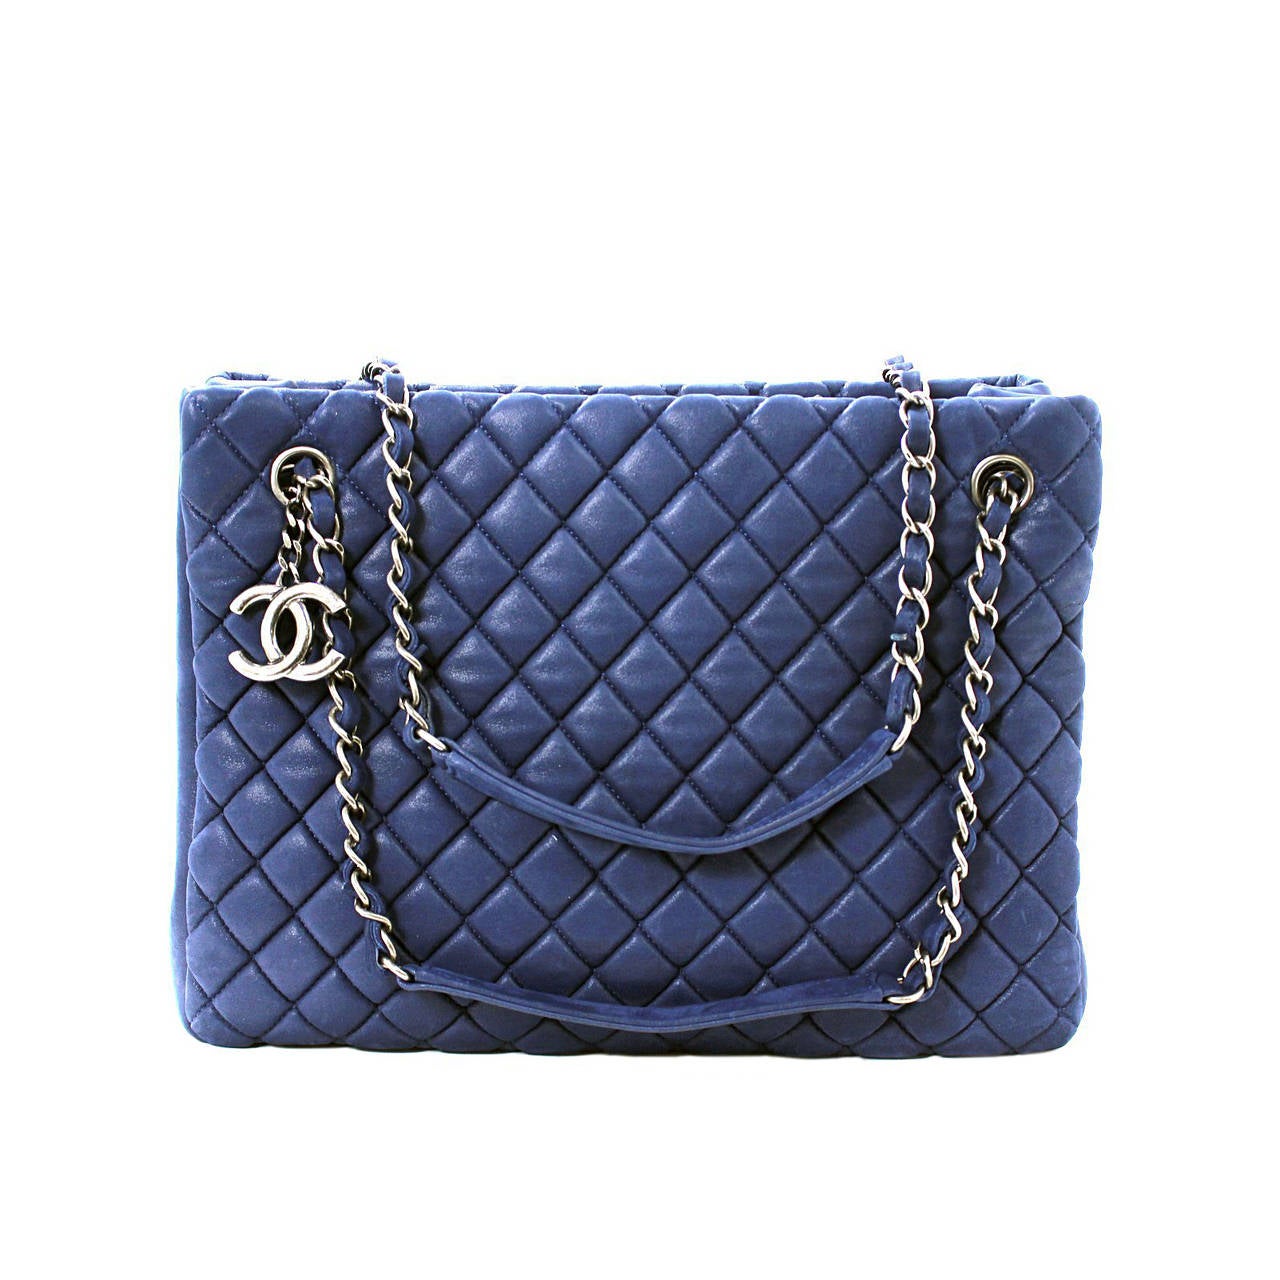 Chanel Cobalt Blue Leather Tote